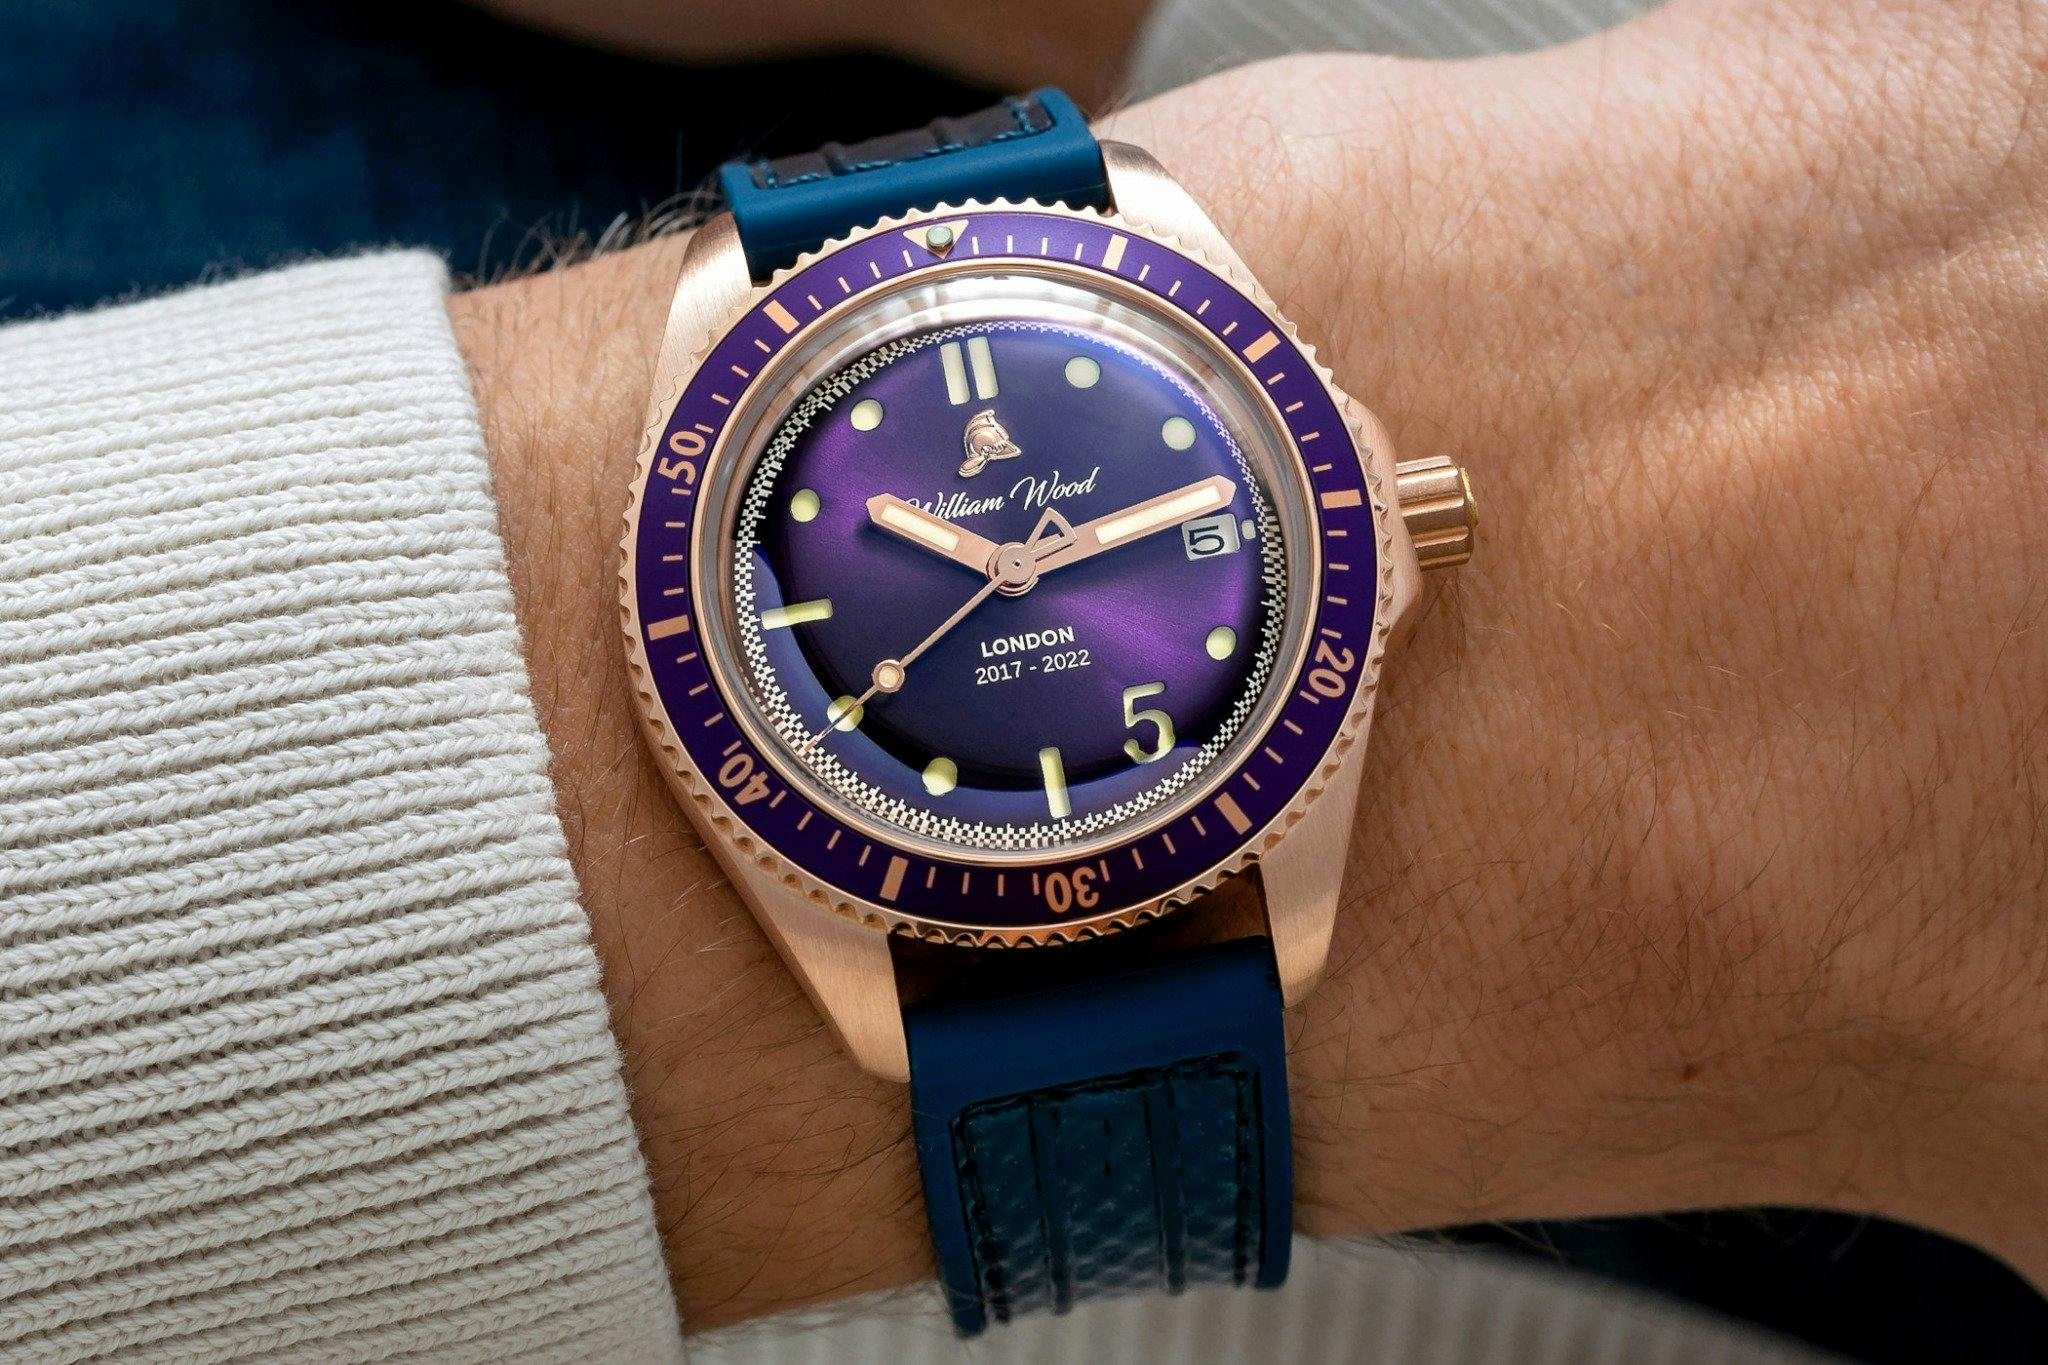 A Purple and bronze watch from william wood with striking colurs and an unusualy single number five on the dial, with a dark blue rubber strap.